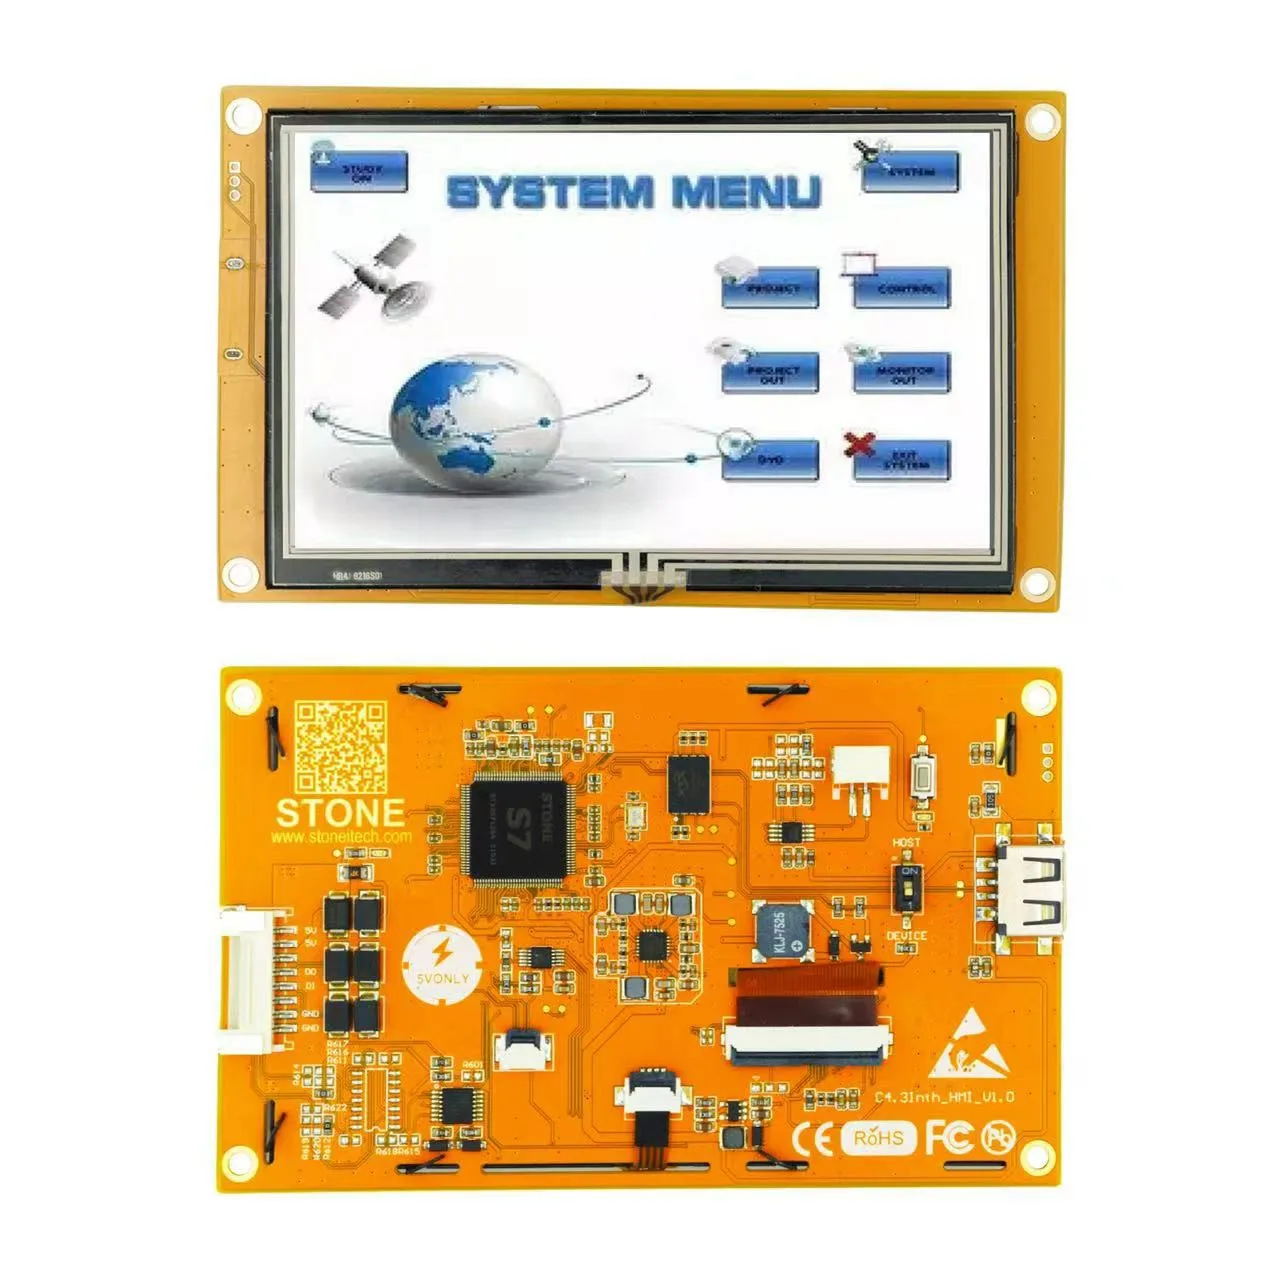 4.3 Inch LCD-TFT HMI Display Module Intelligent Series RS232/TTL Resistive Touch Panel for Industrial Equipment Control